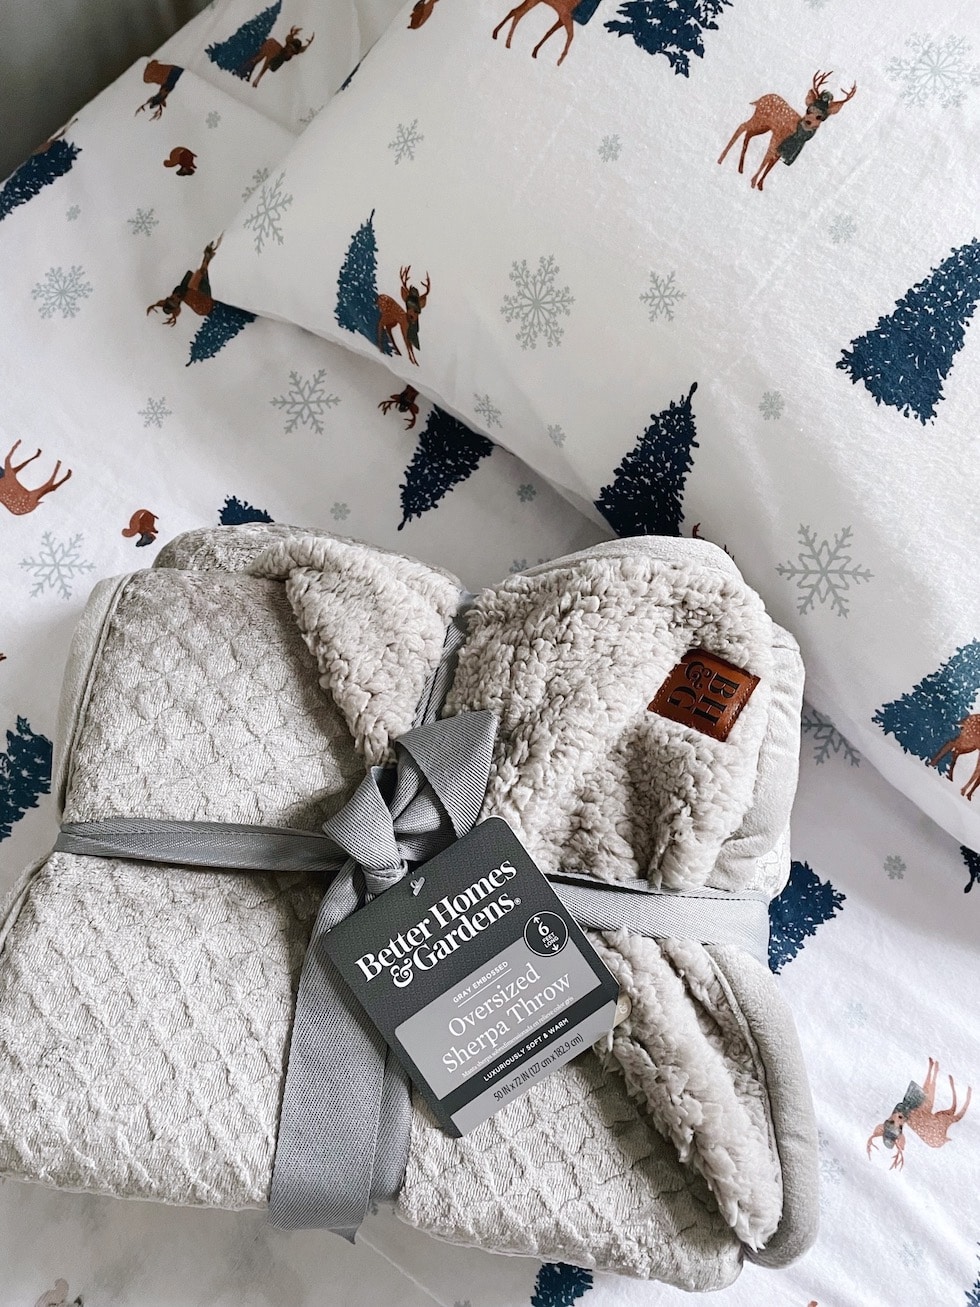 My Cozy and Festive Guest Room + Gifts (from Walmart!)